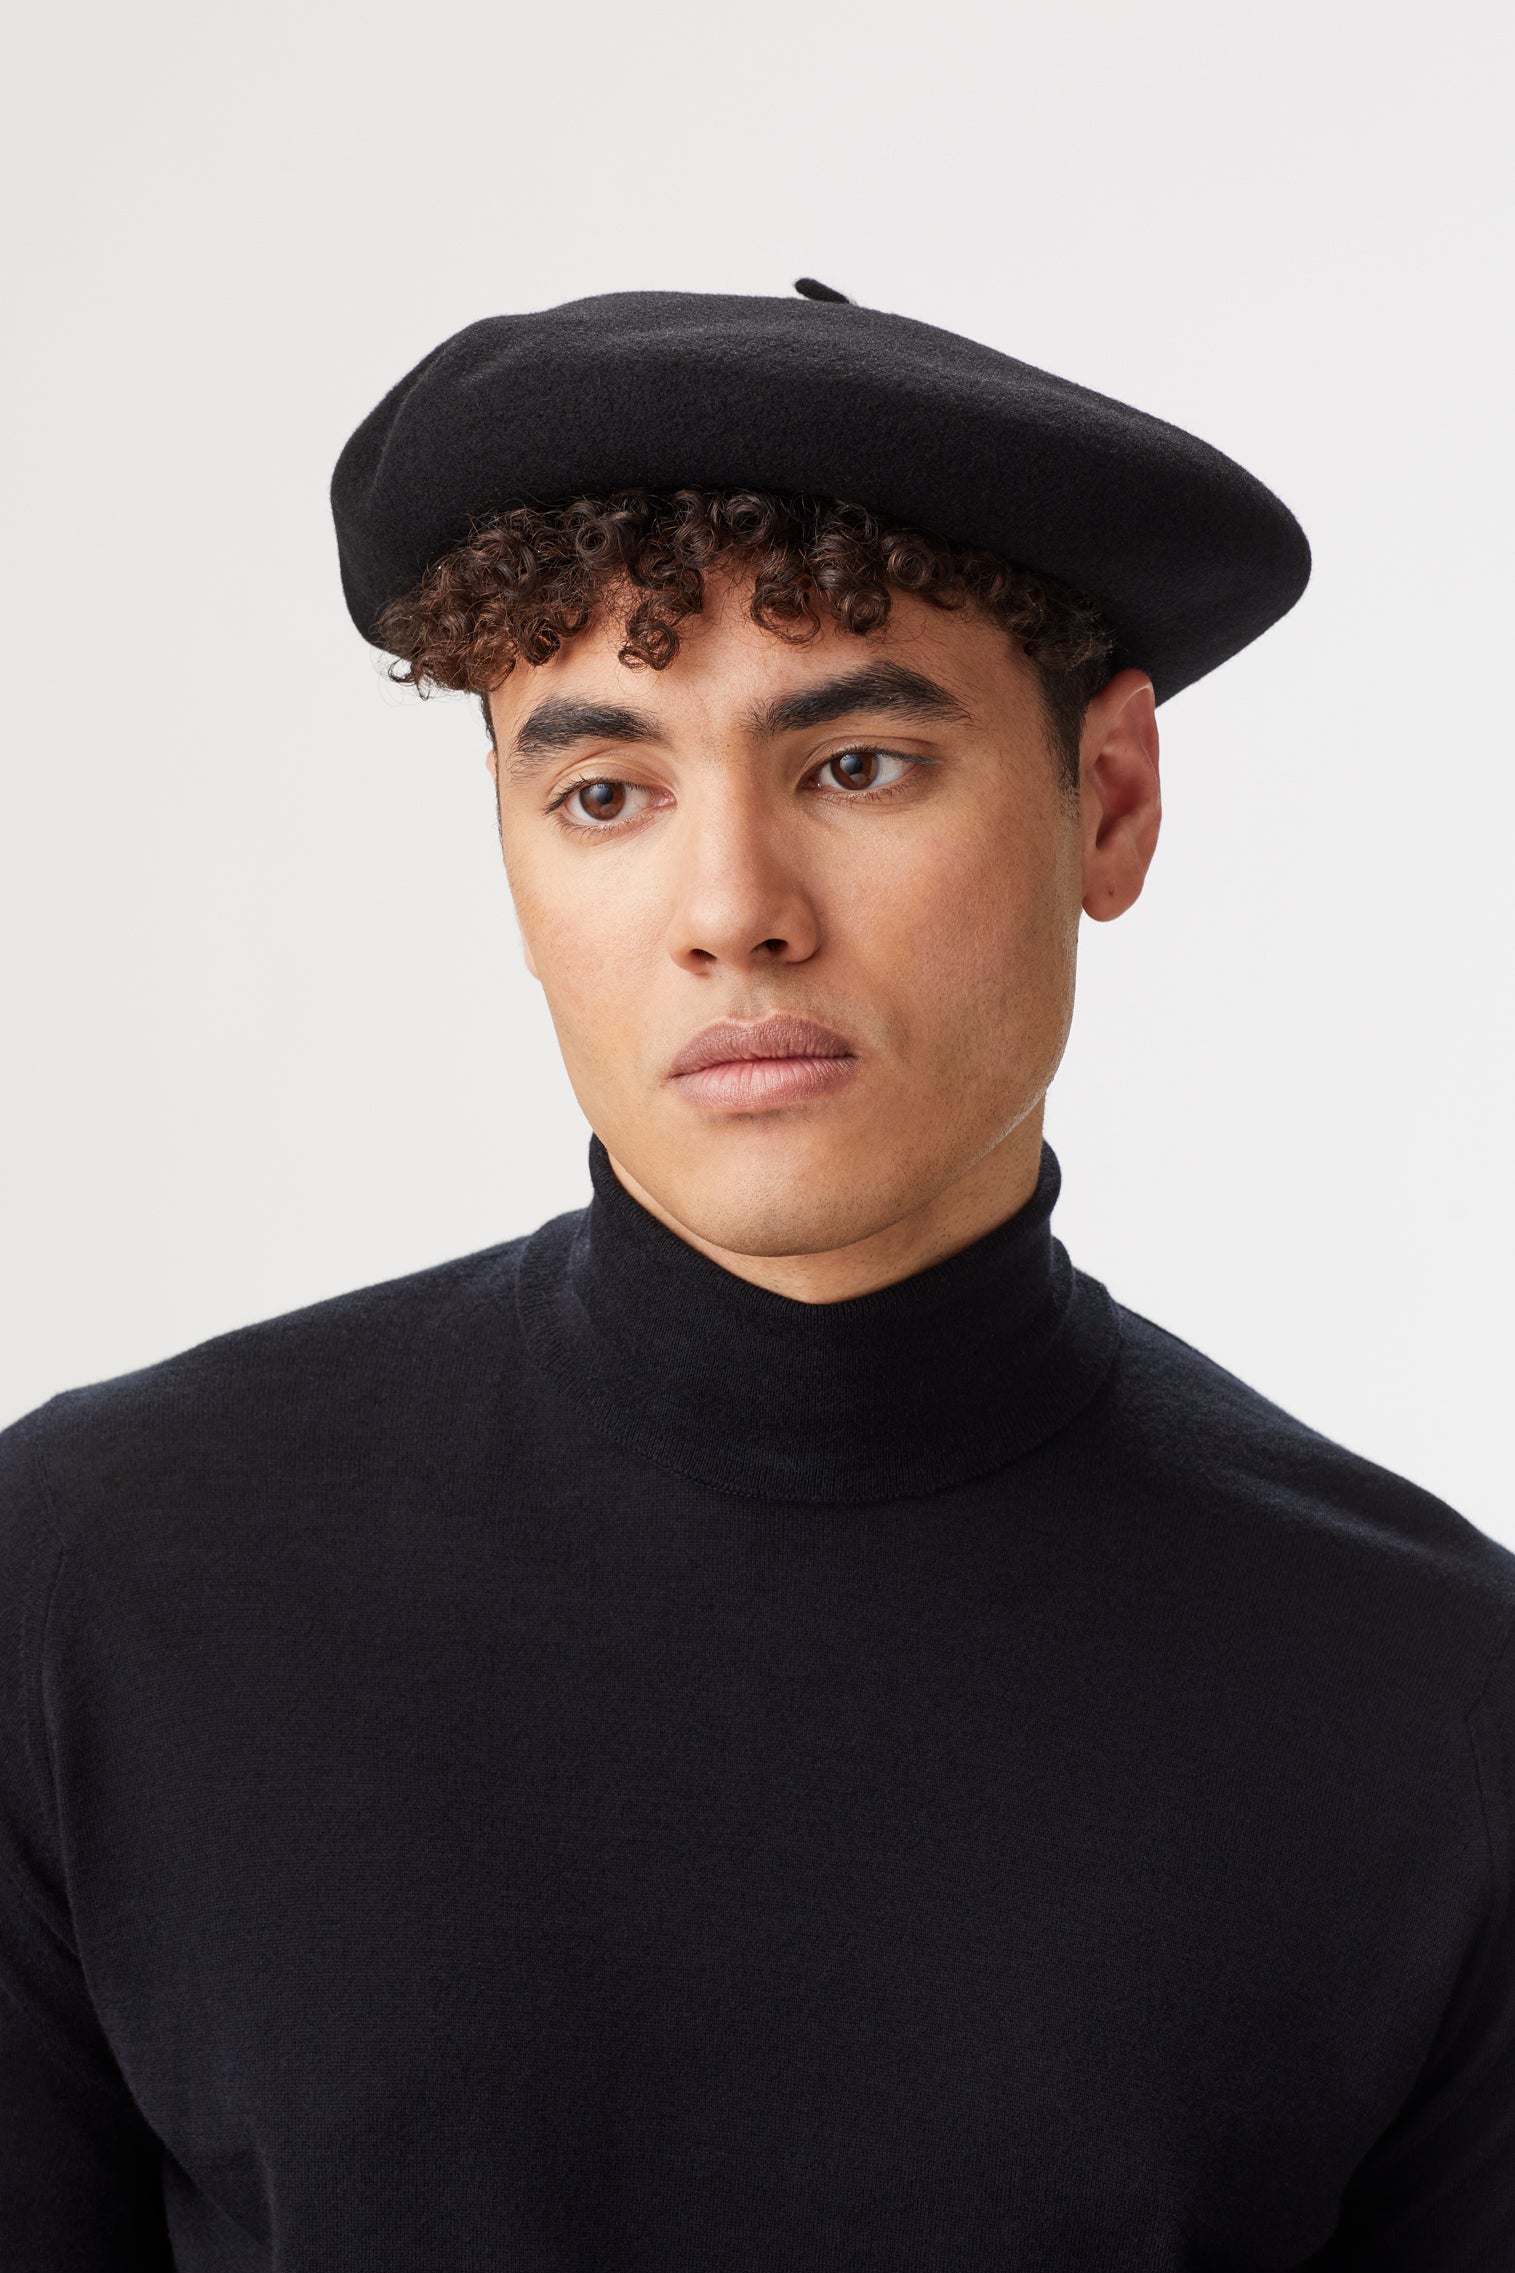 Basque Beret - Hats for Tall People - Lock & Co. Hatters London UK